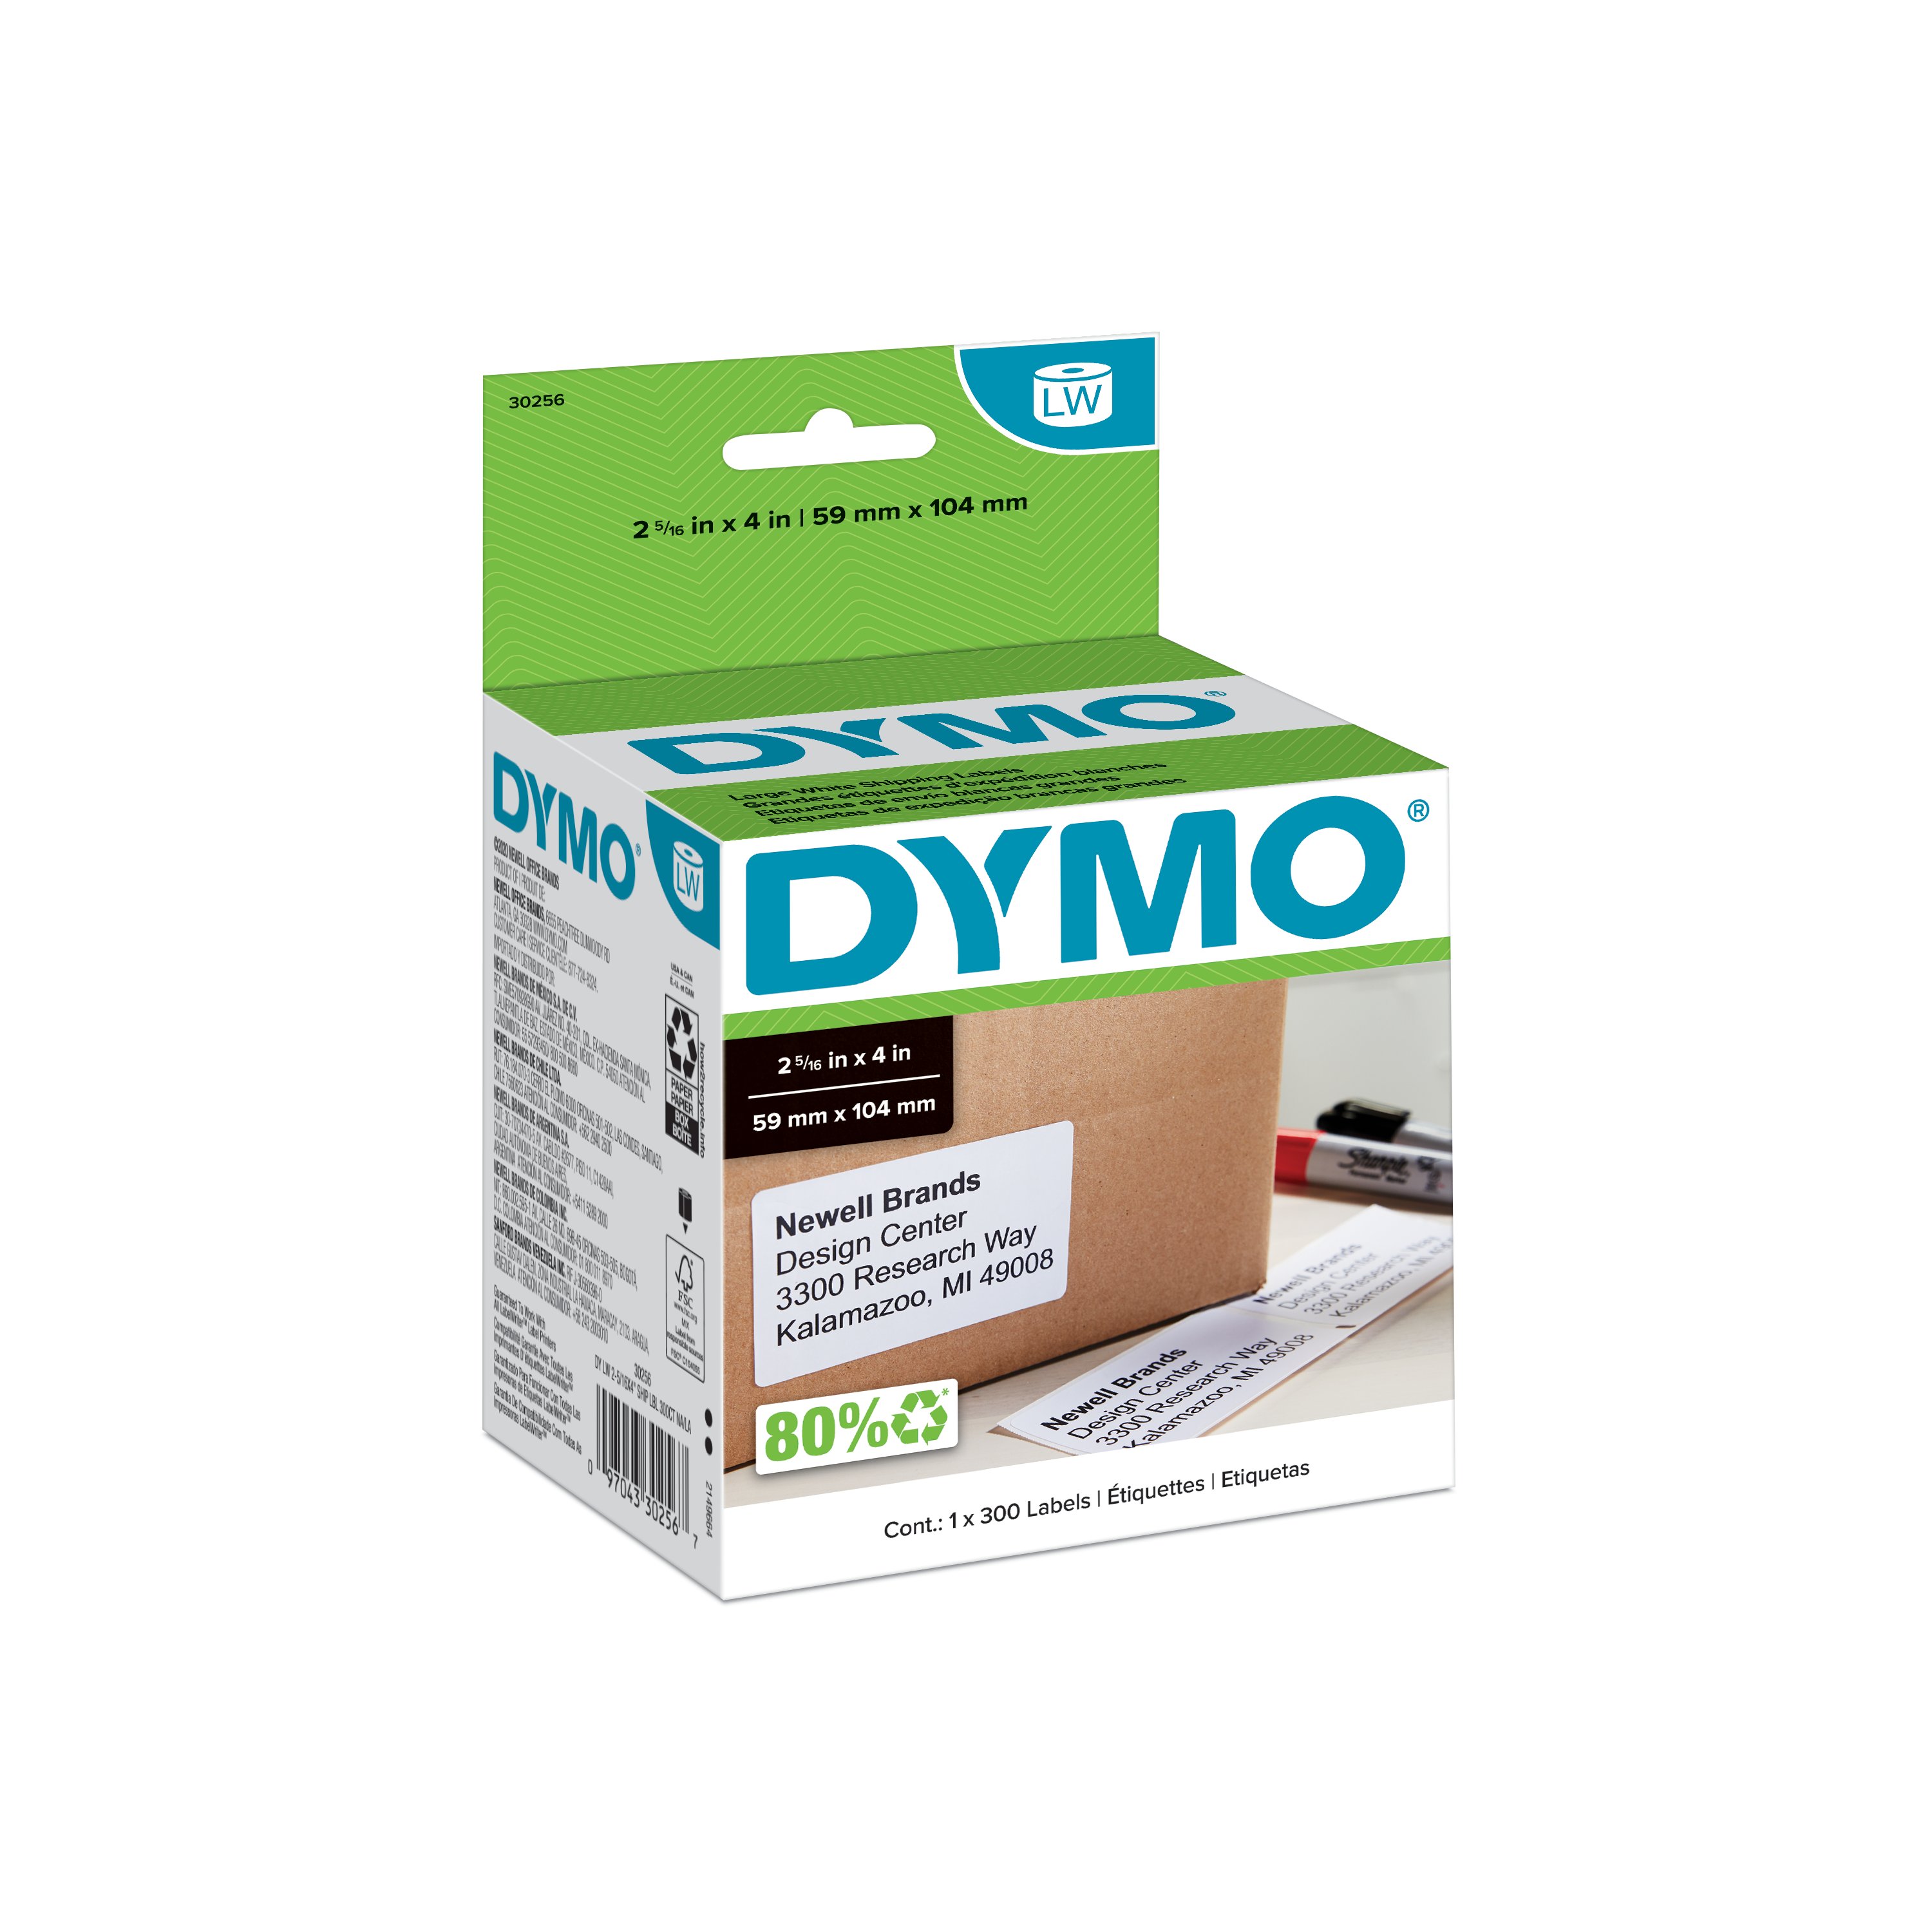 2-5/16" x 4" Compatible w/ Dymo LabelWriter TURBO 18 Rolls 30256 White Labels 